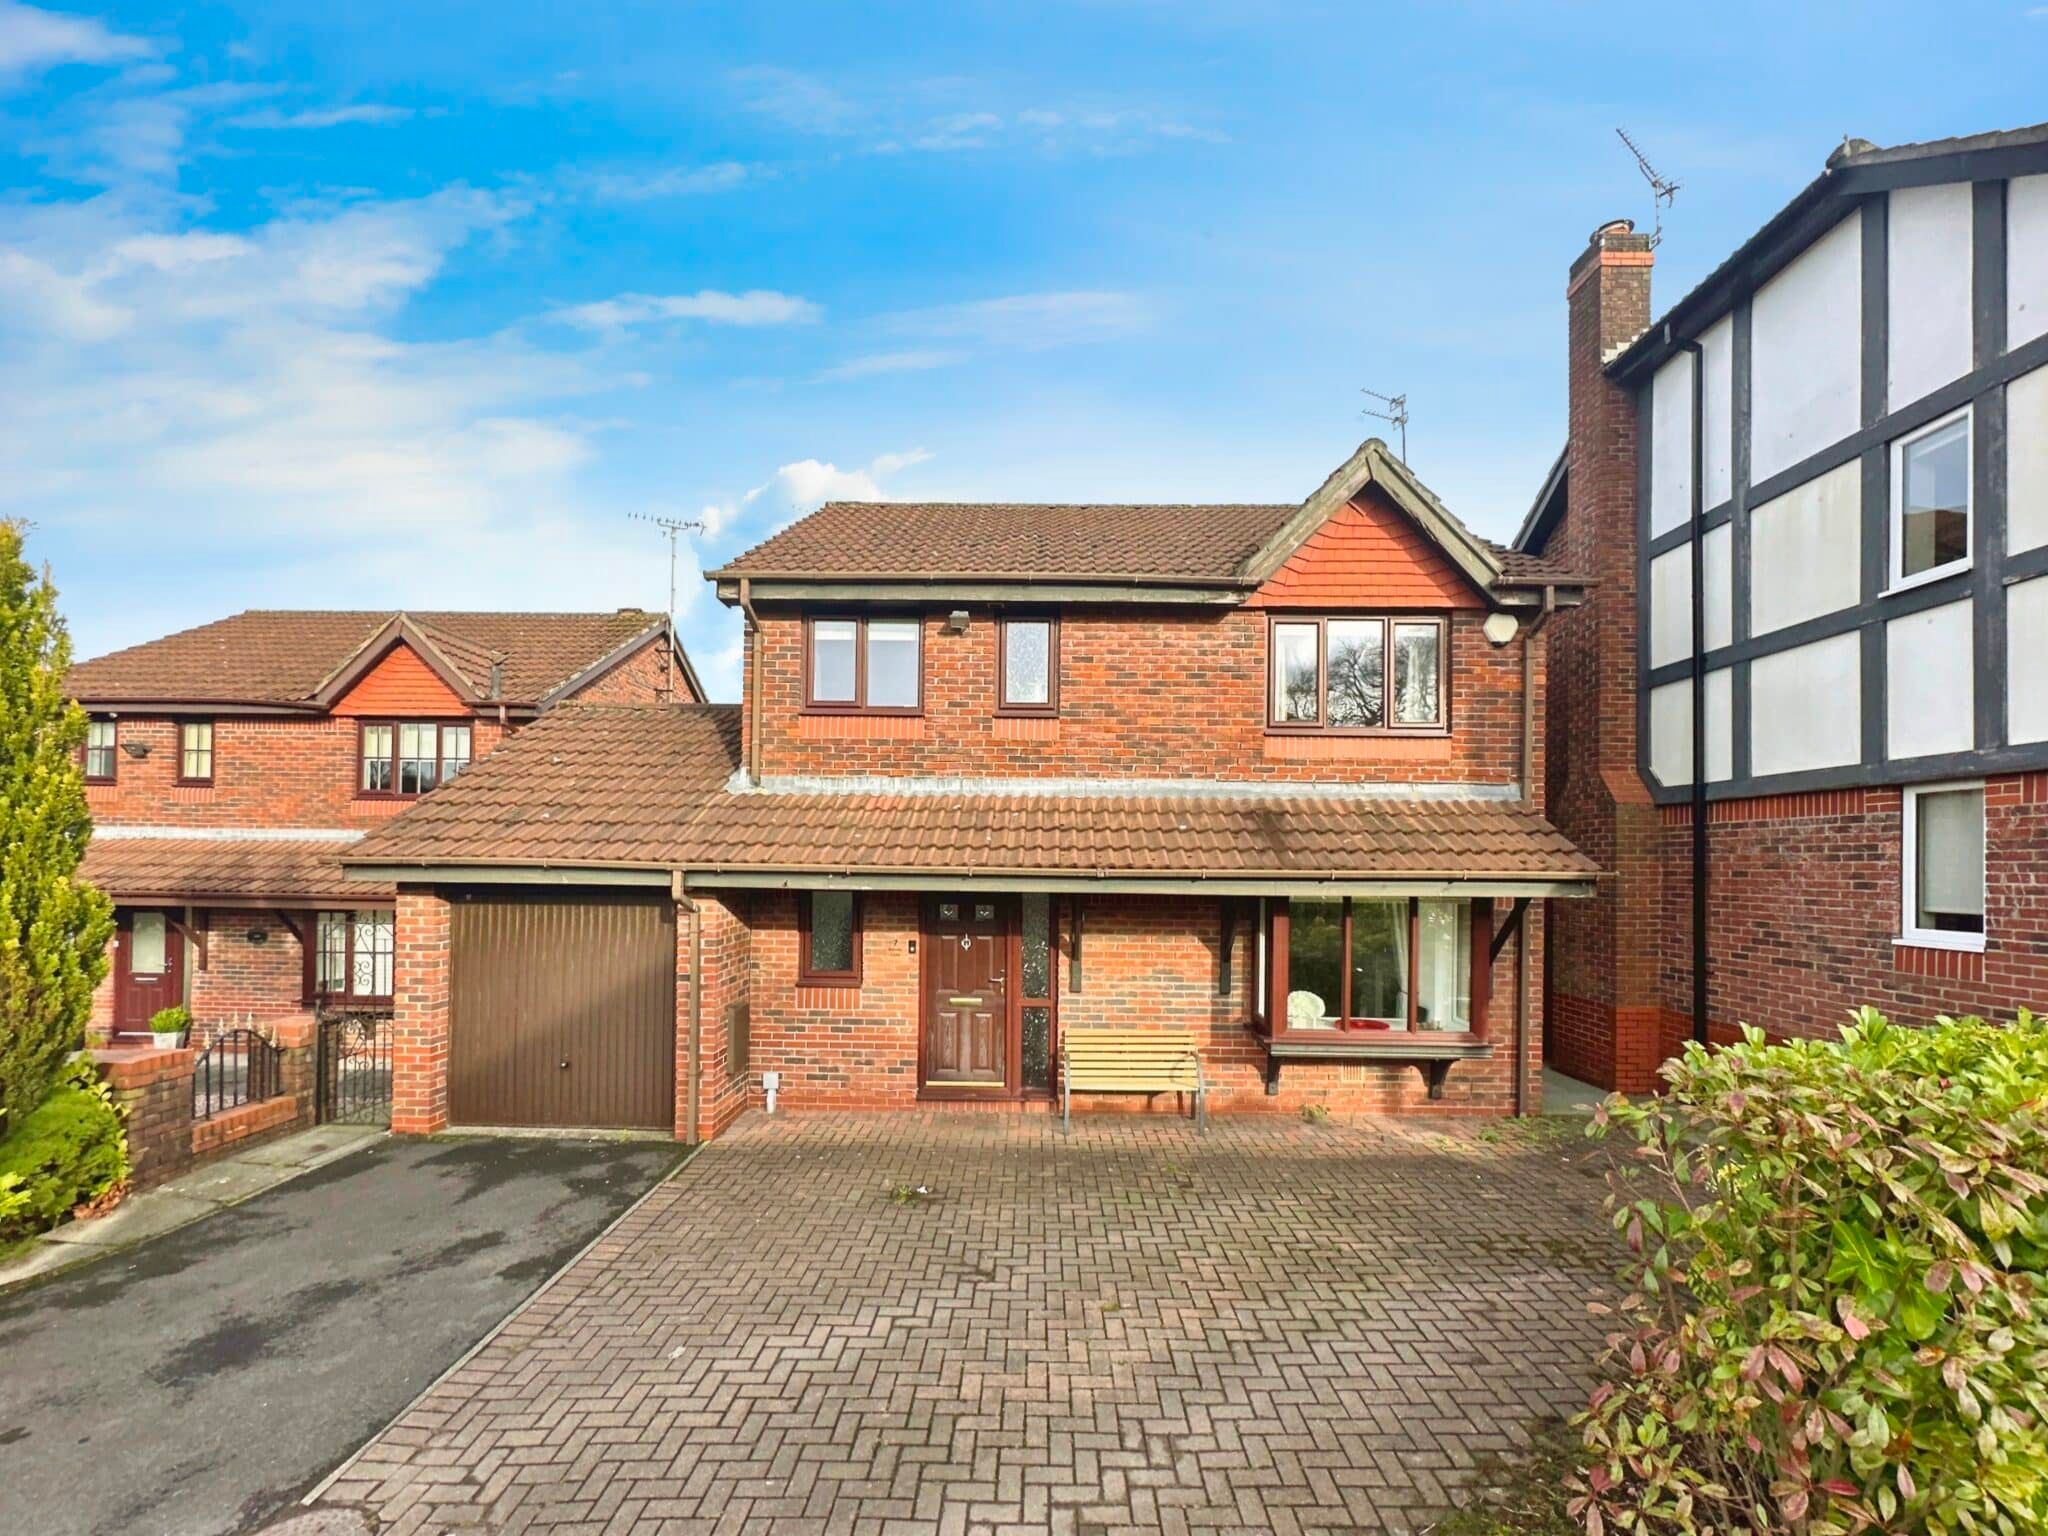 Bellerby Close, Whitefield, Manchester, Manchester, M45 7UB